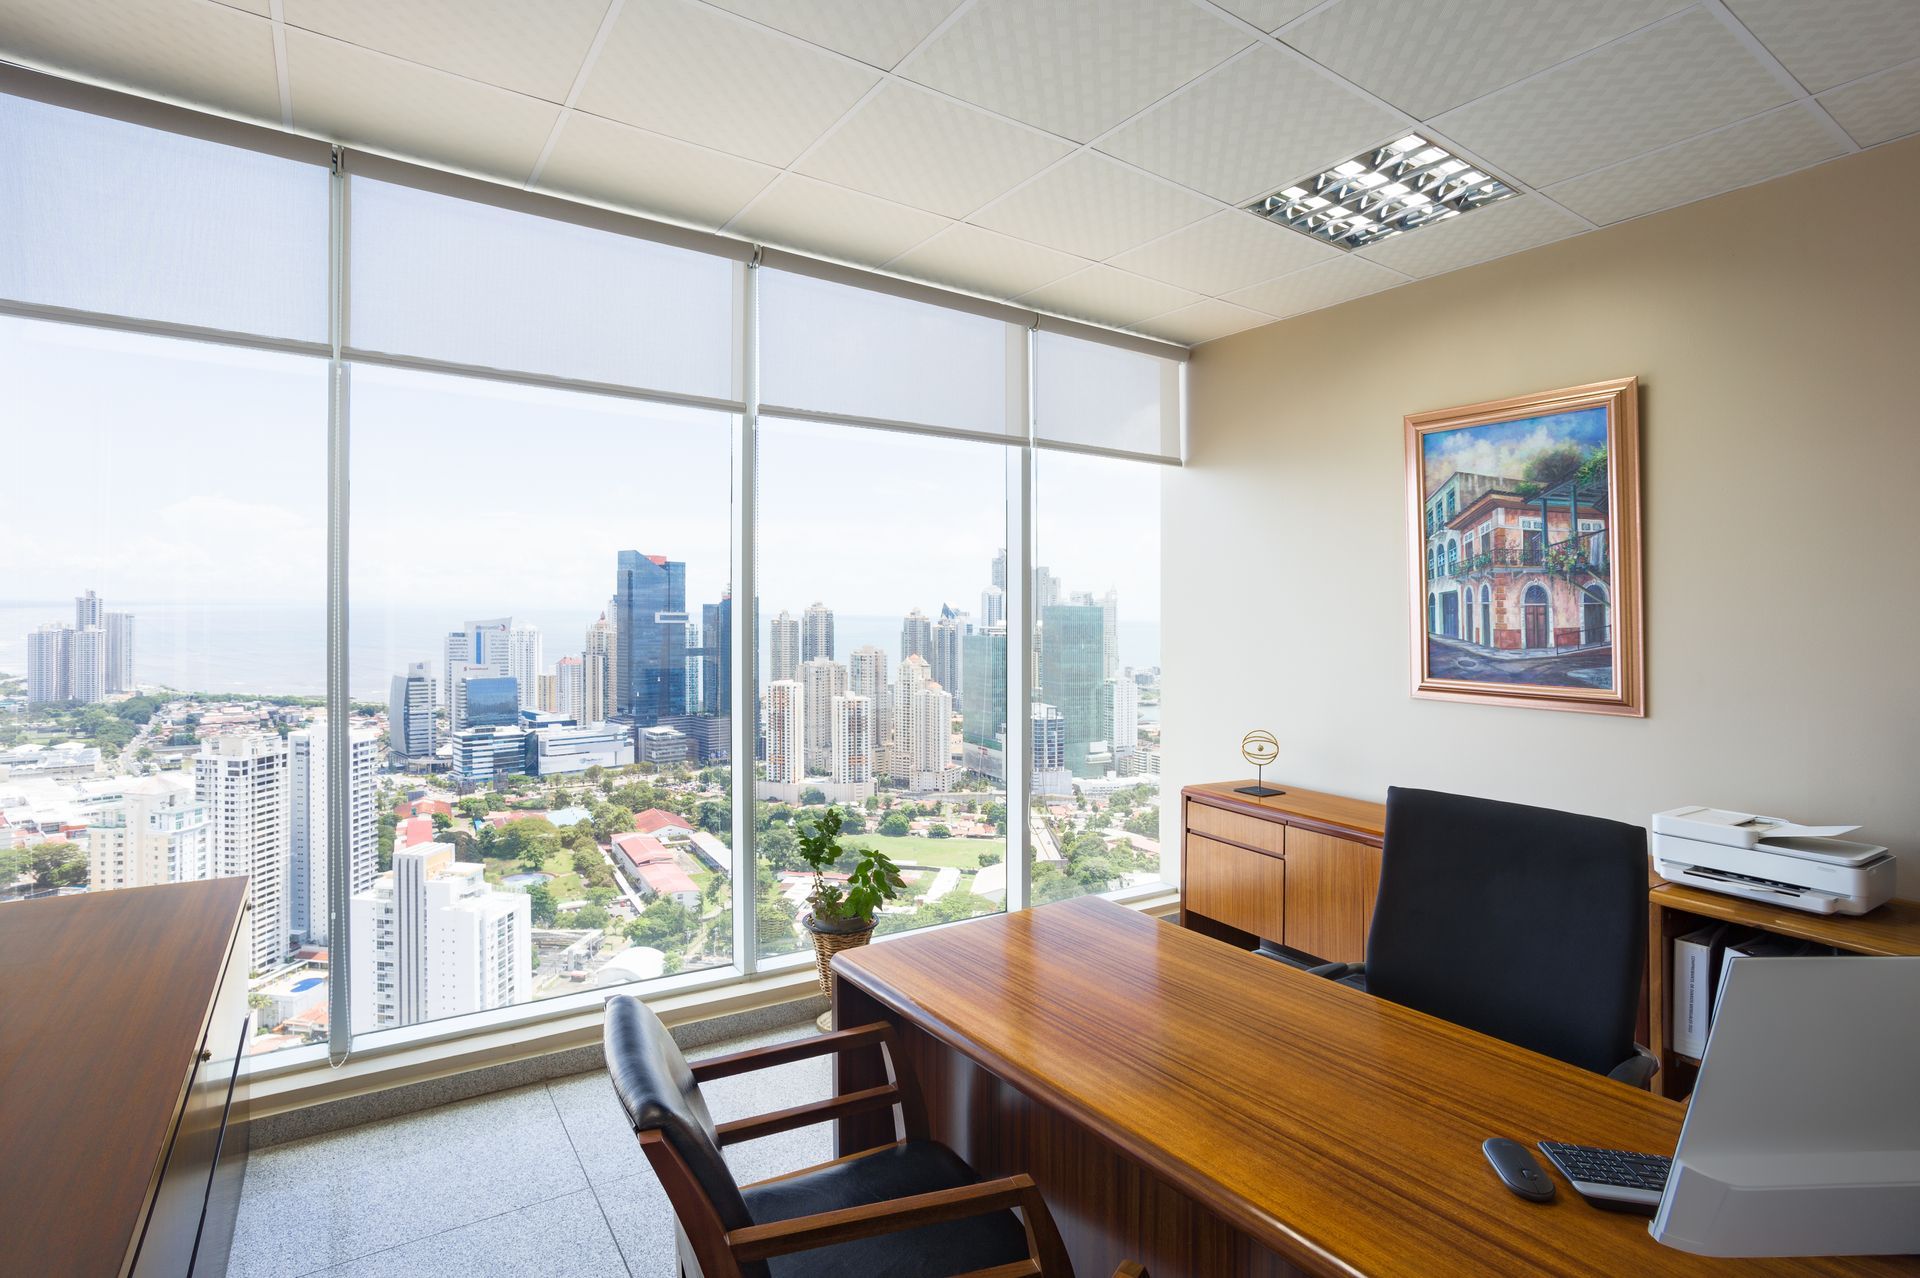 Office with big window overlooking a city